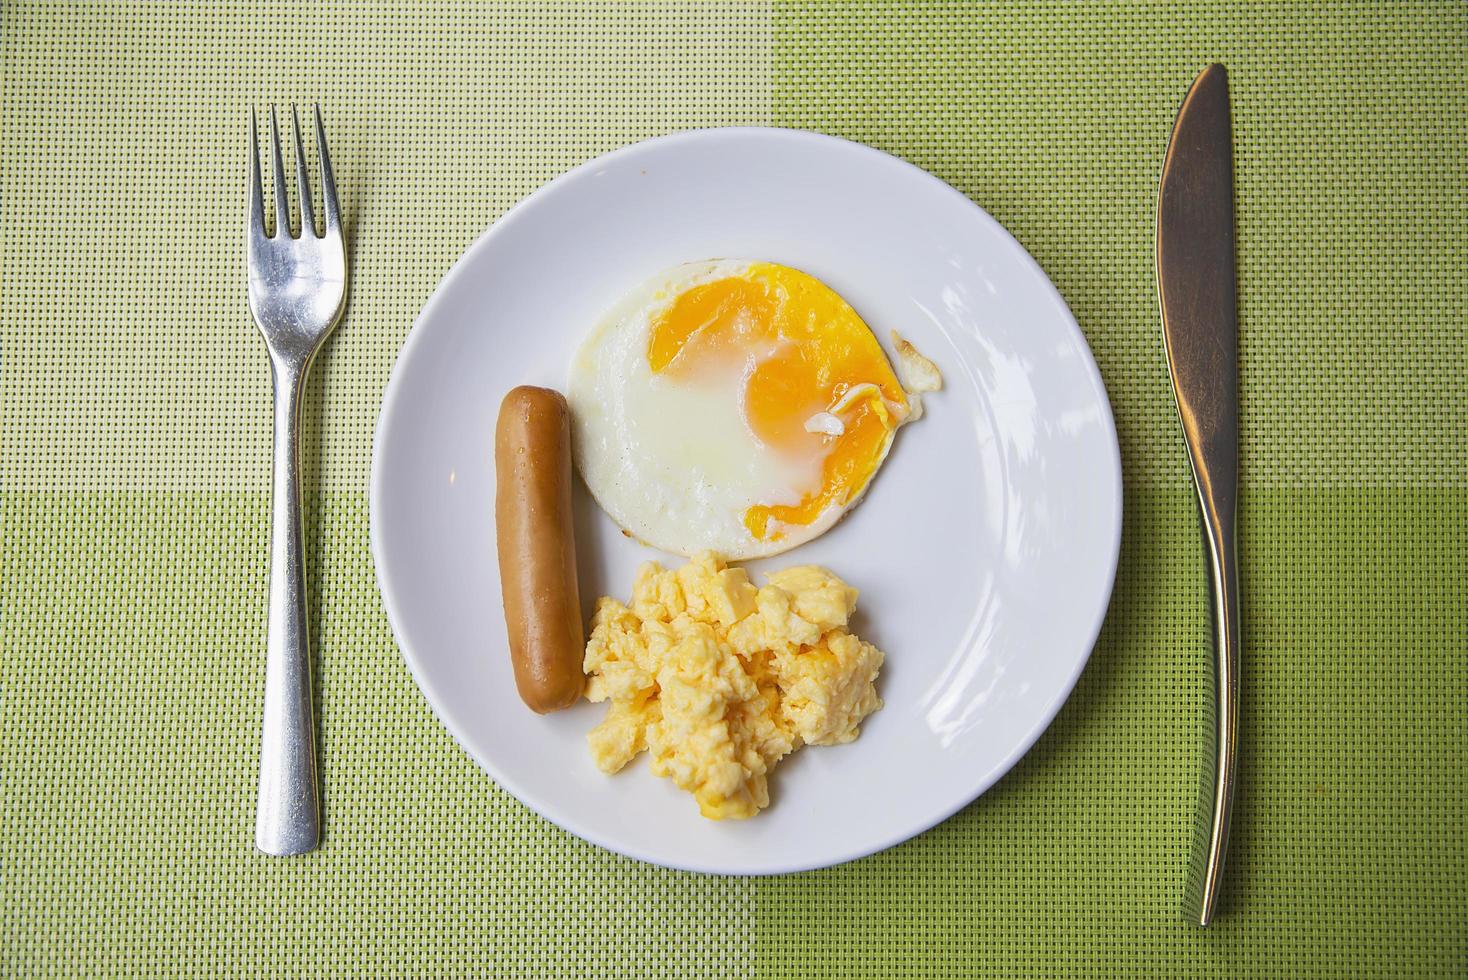 Sausage with egg breakfast set - breakfast food concept photo